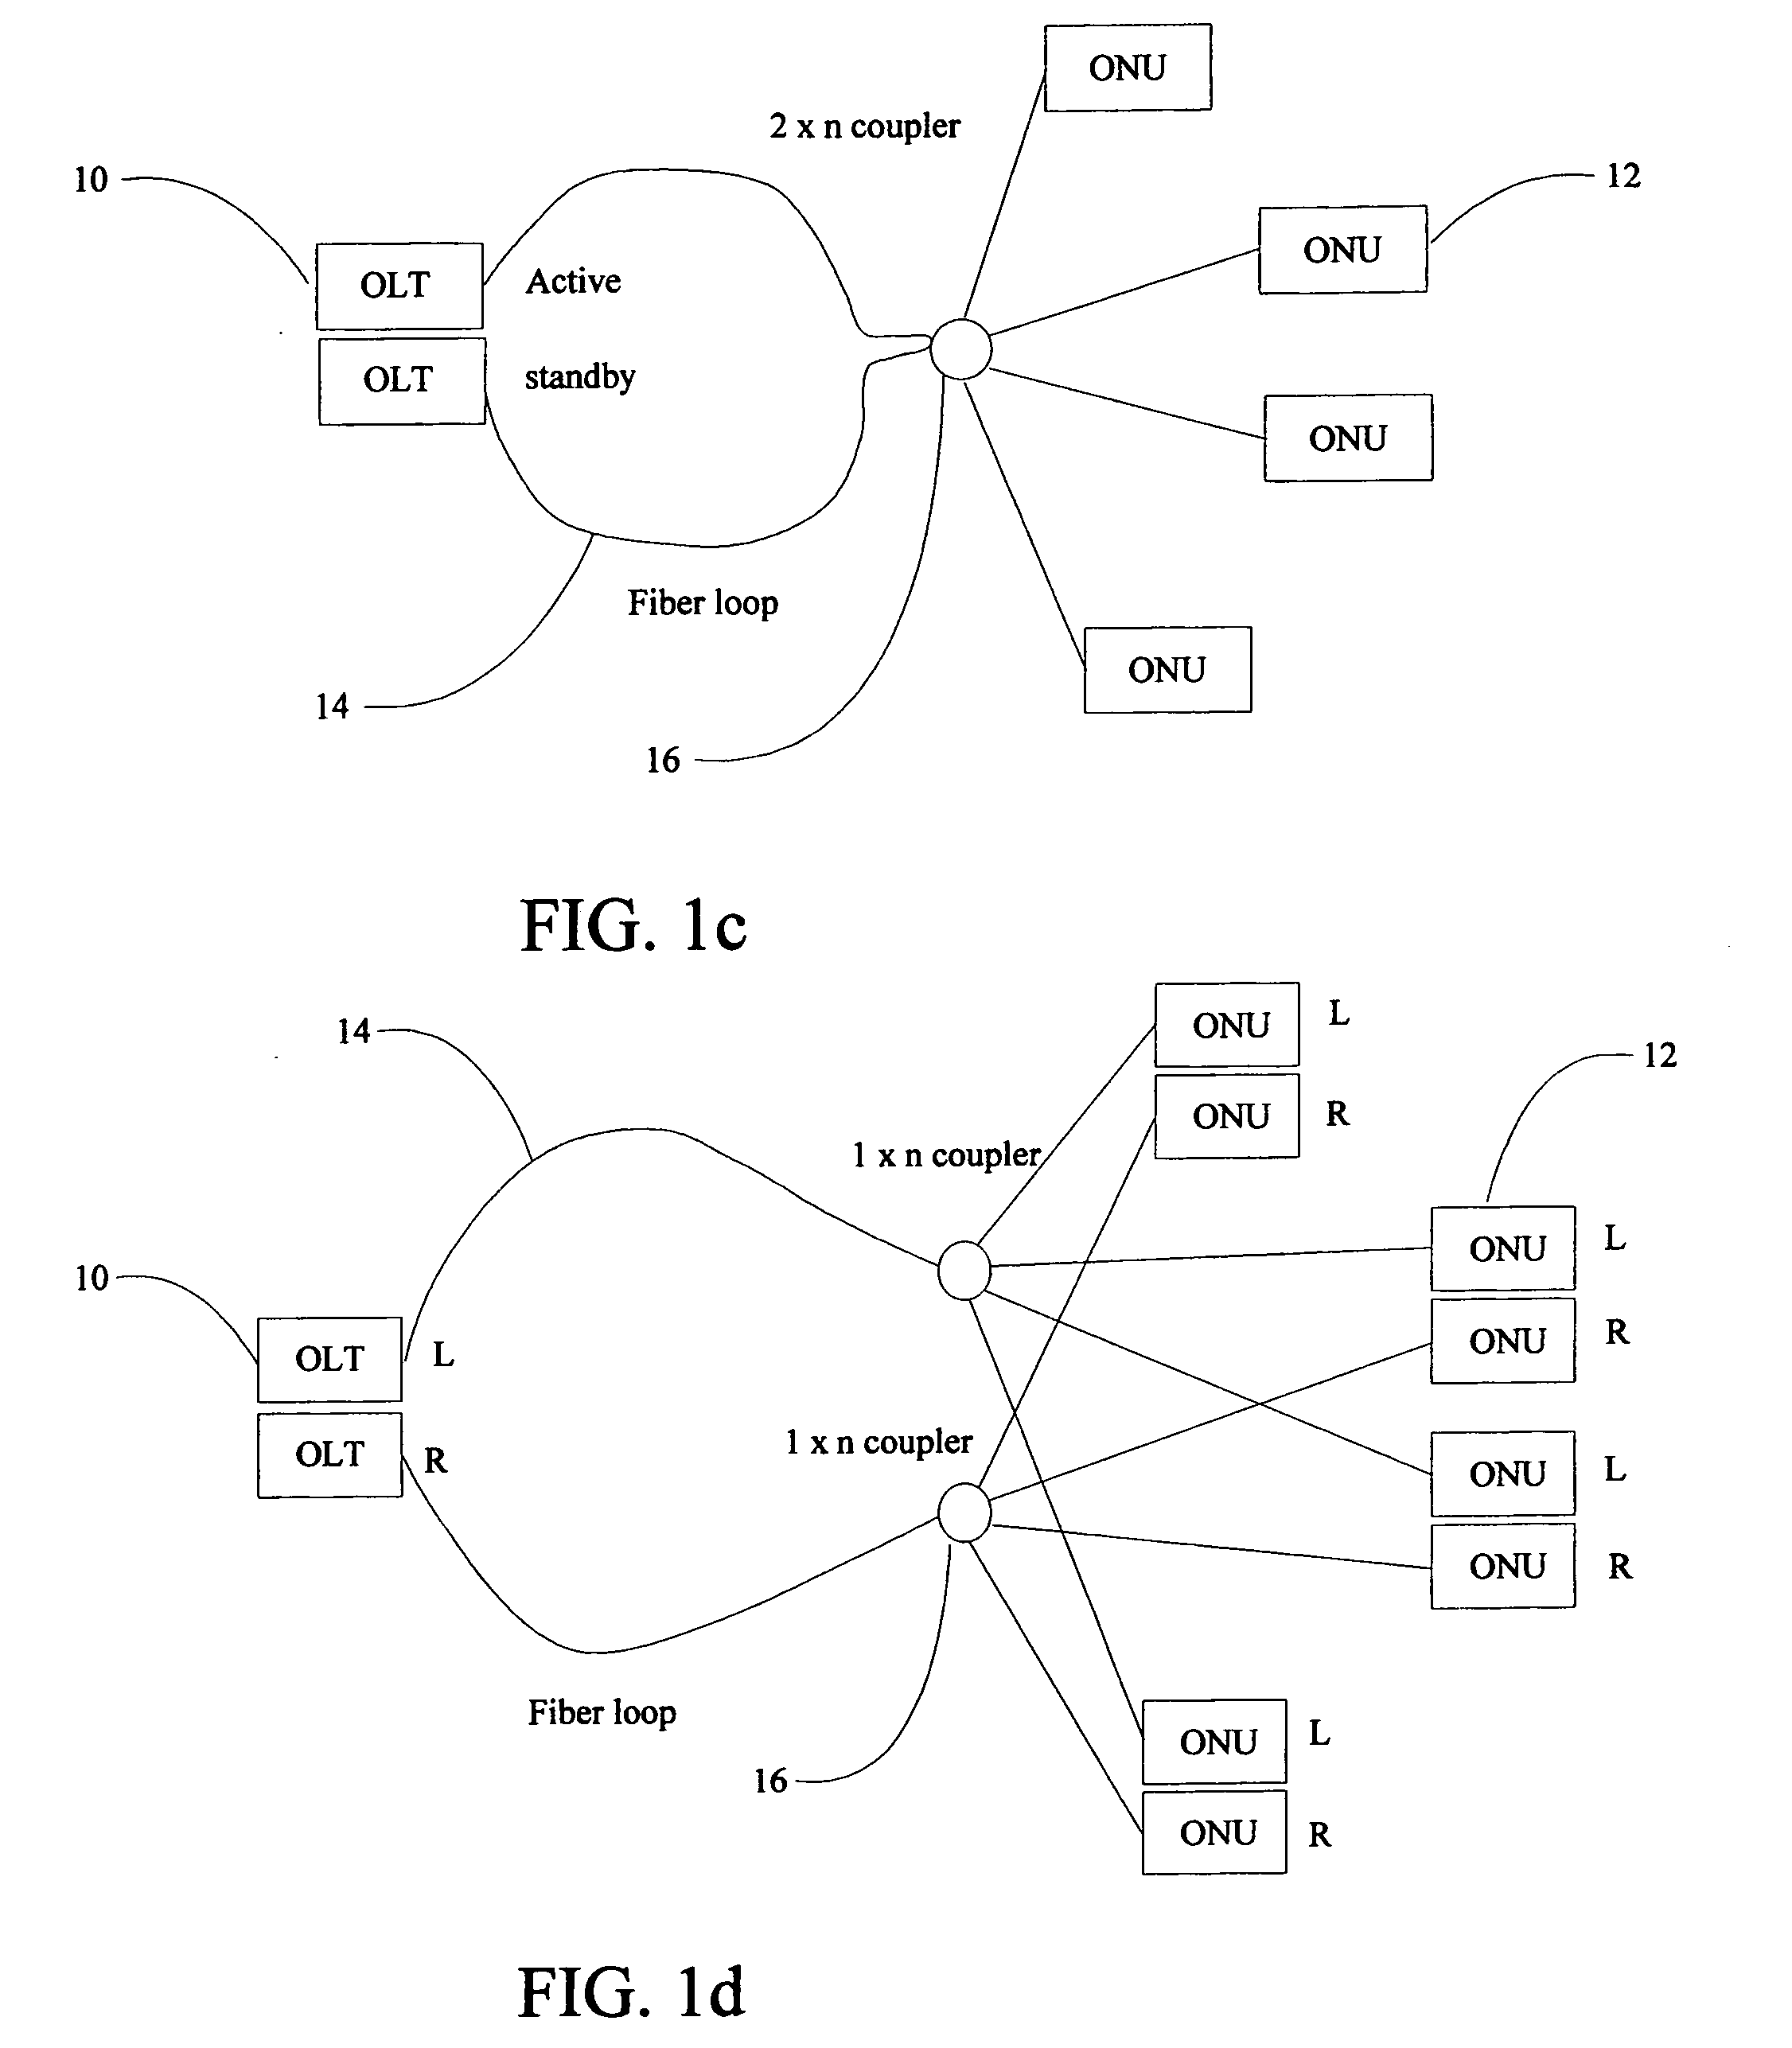 System and apparatus for a carrier class WDM PON accommodating multiple services or protocols